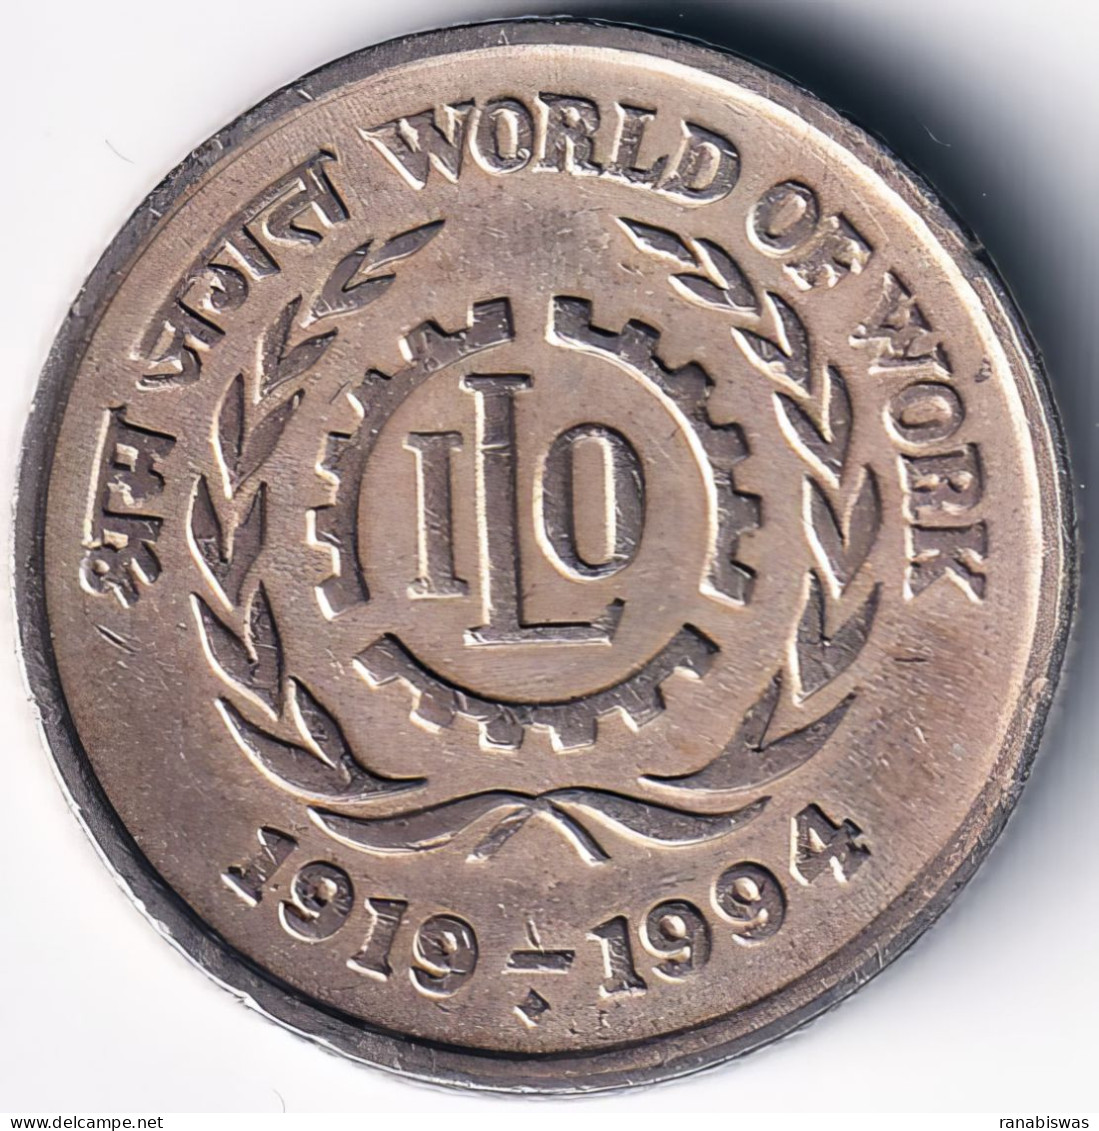 INDIA COIN LOT 131, 5 RUPEES 1994, WORLD OF WORK, ILO, BOMBAY MINT, XF - Inde